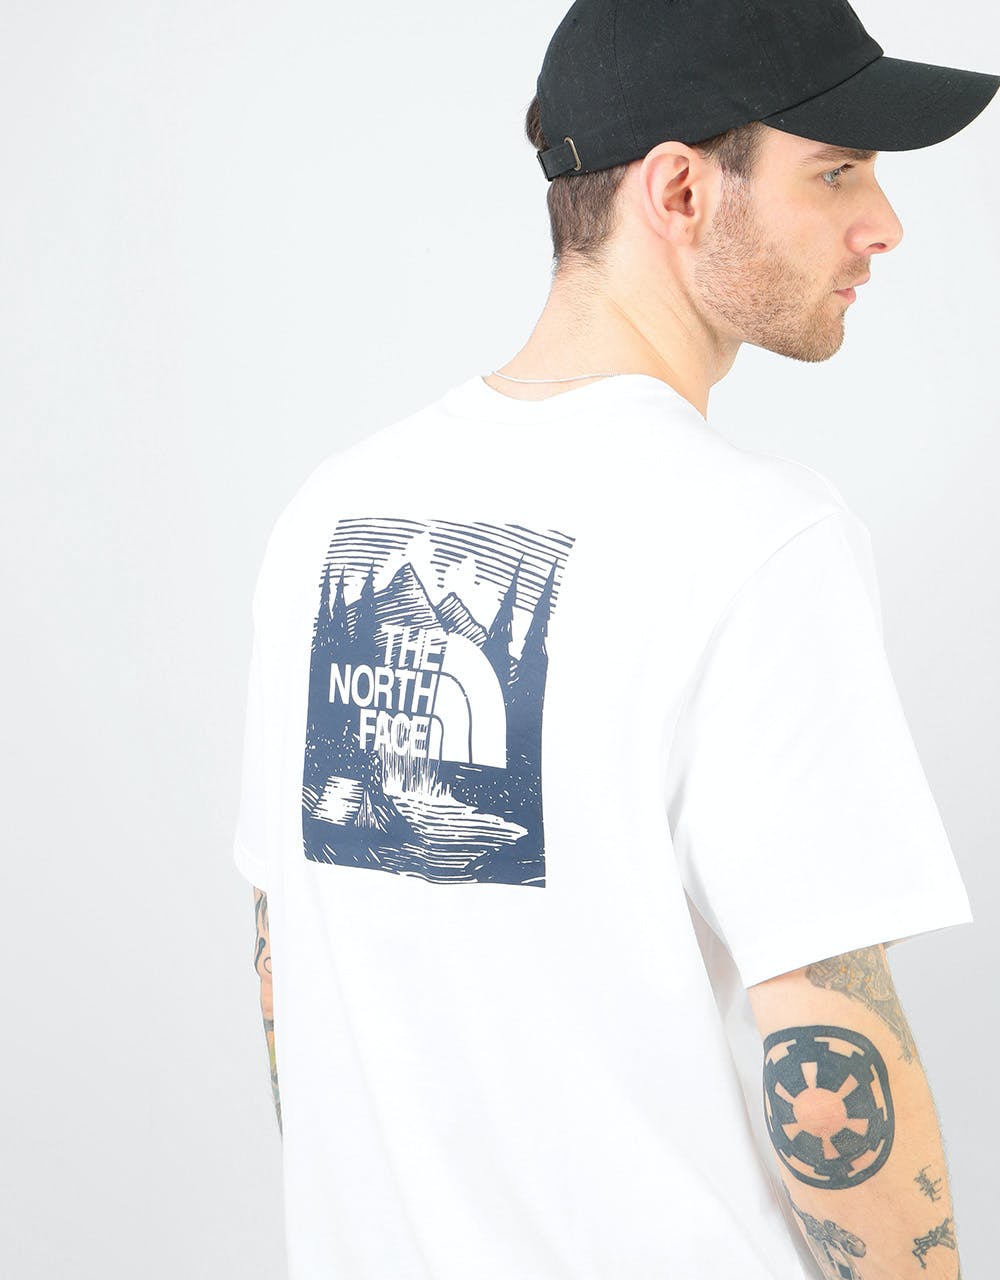 The North Face S/S Red Box Celebration T-Shirt - TNF White/Urban Navy